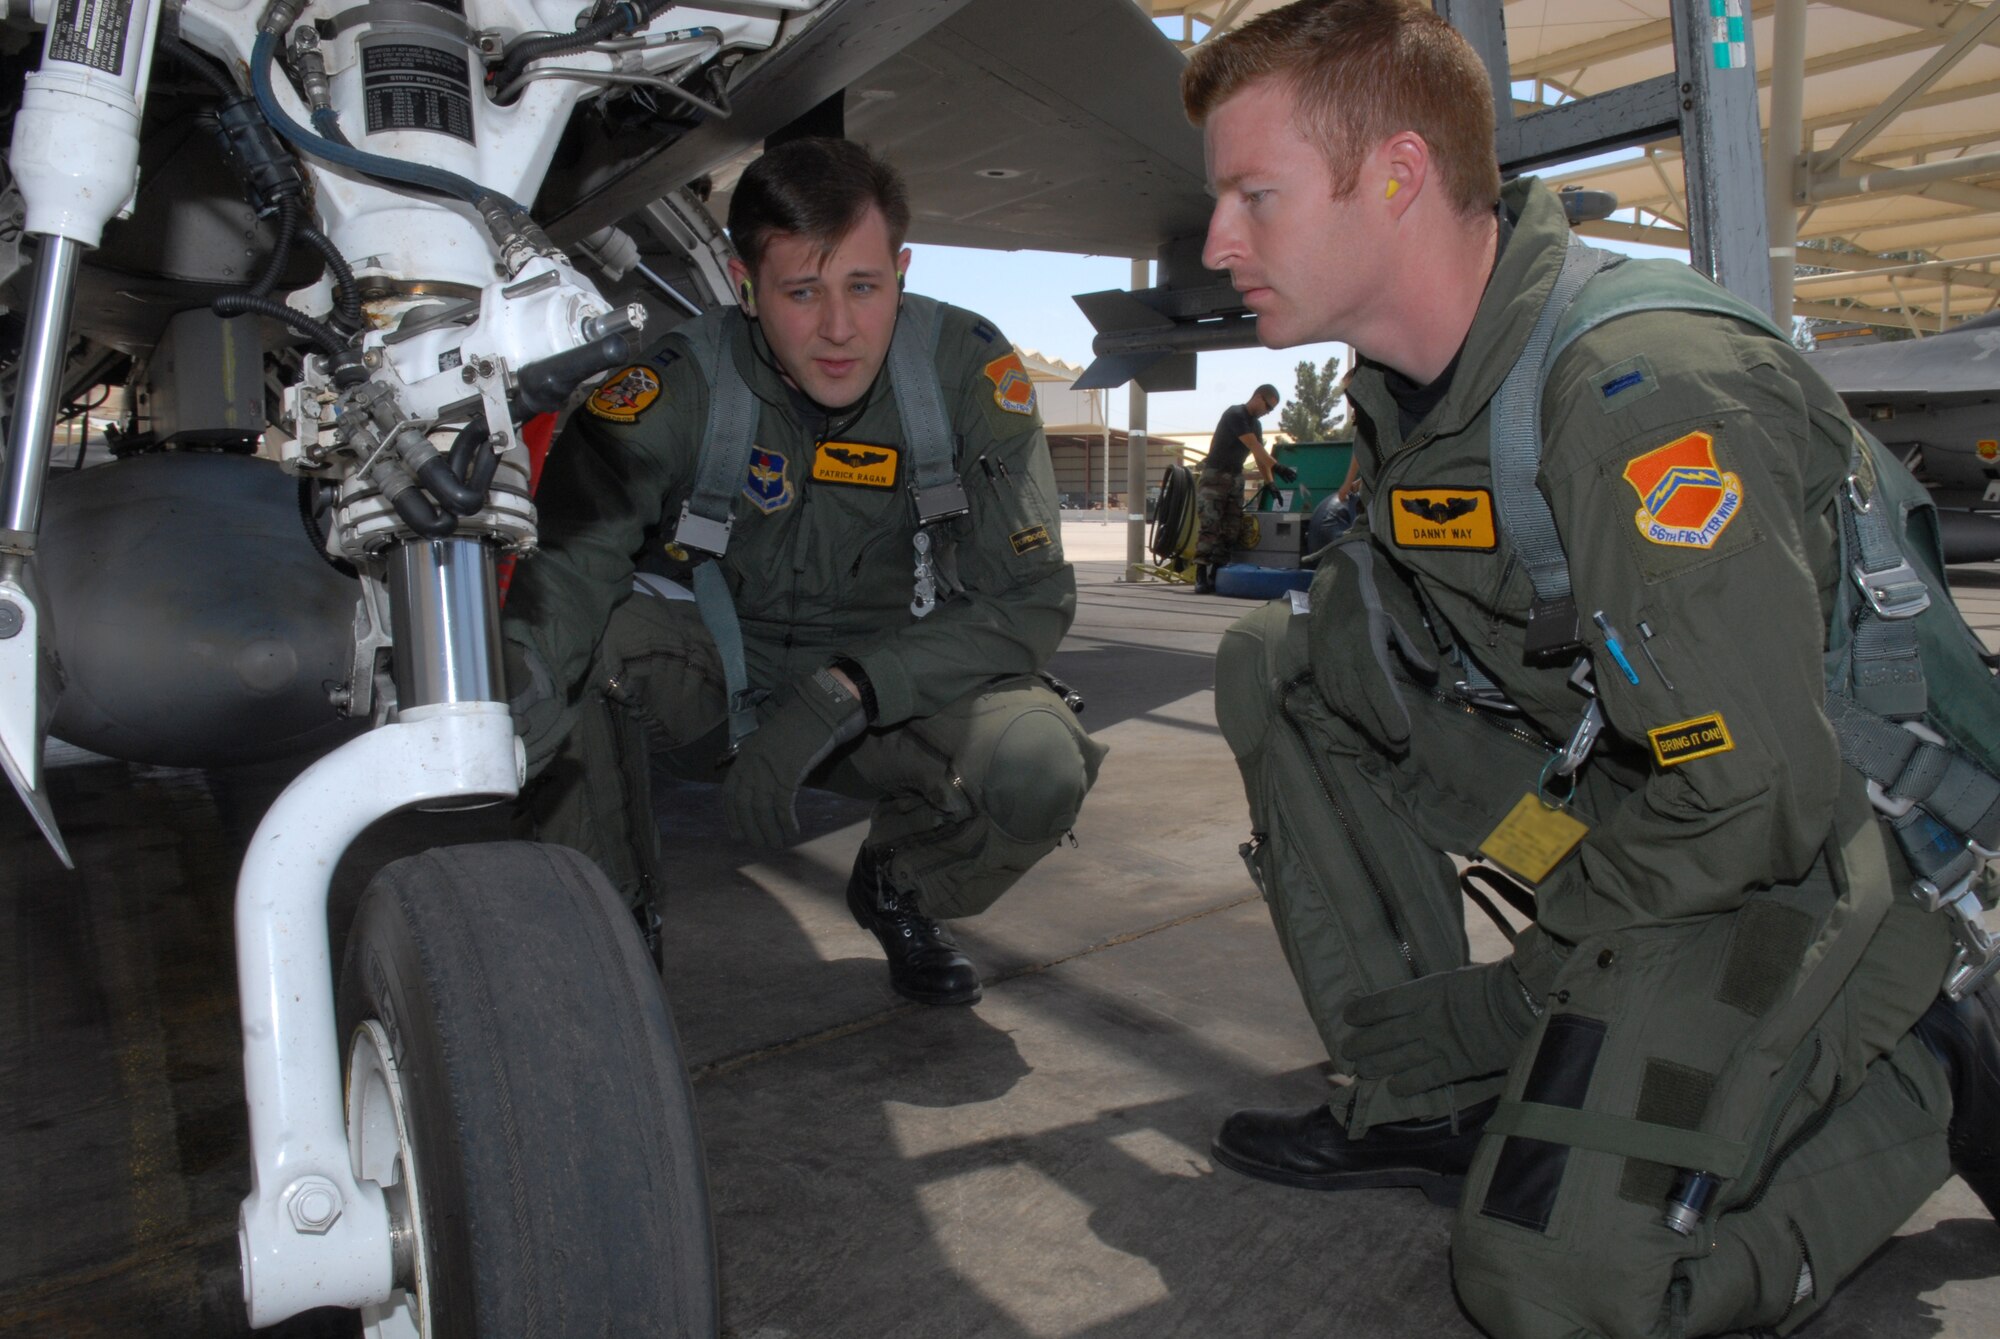 1st Lieutenant Danny May, a 61st Fighter Squadron student pilot, and Captain Patrick Ragan, a 61st FS instructor pilot, perform their flight pre-checks on an F-16, Apr. 29, Luke Air Force Base, Ariz. This is Lt. May's first time flying an F-16. (U.S. Air Force photo/Airman 1st Class Gustavo Gonzalez)